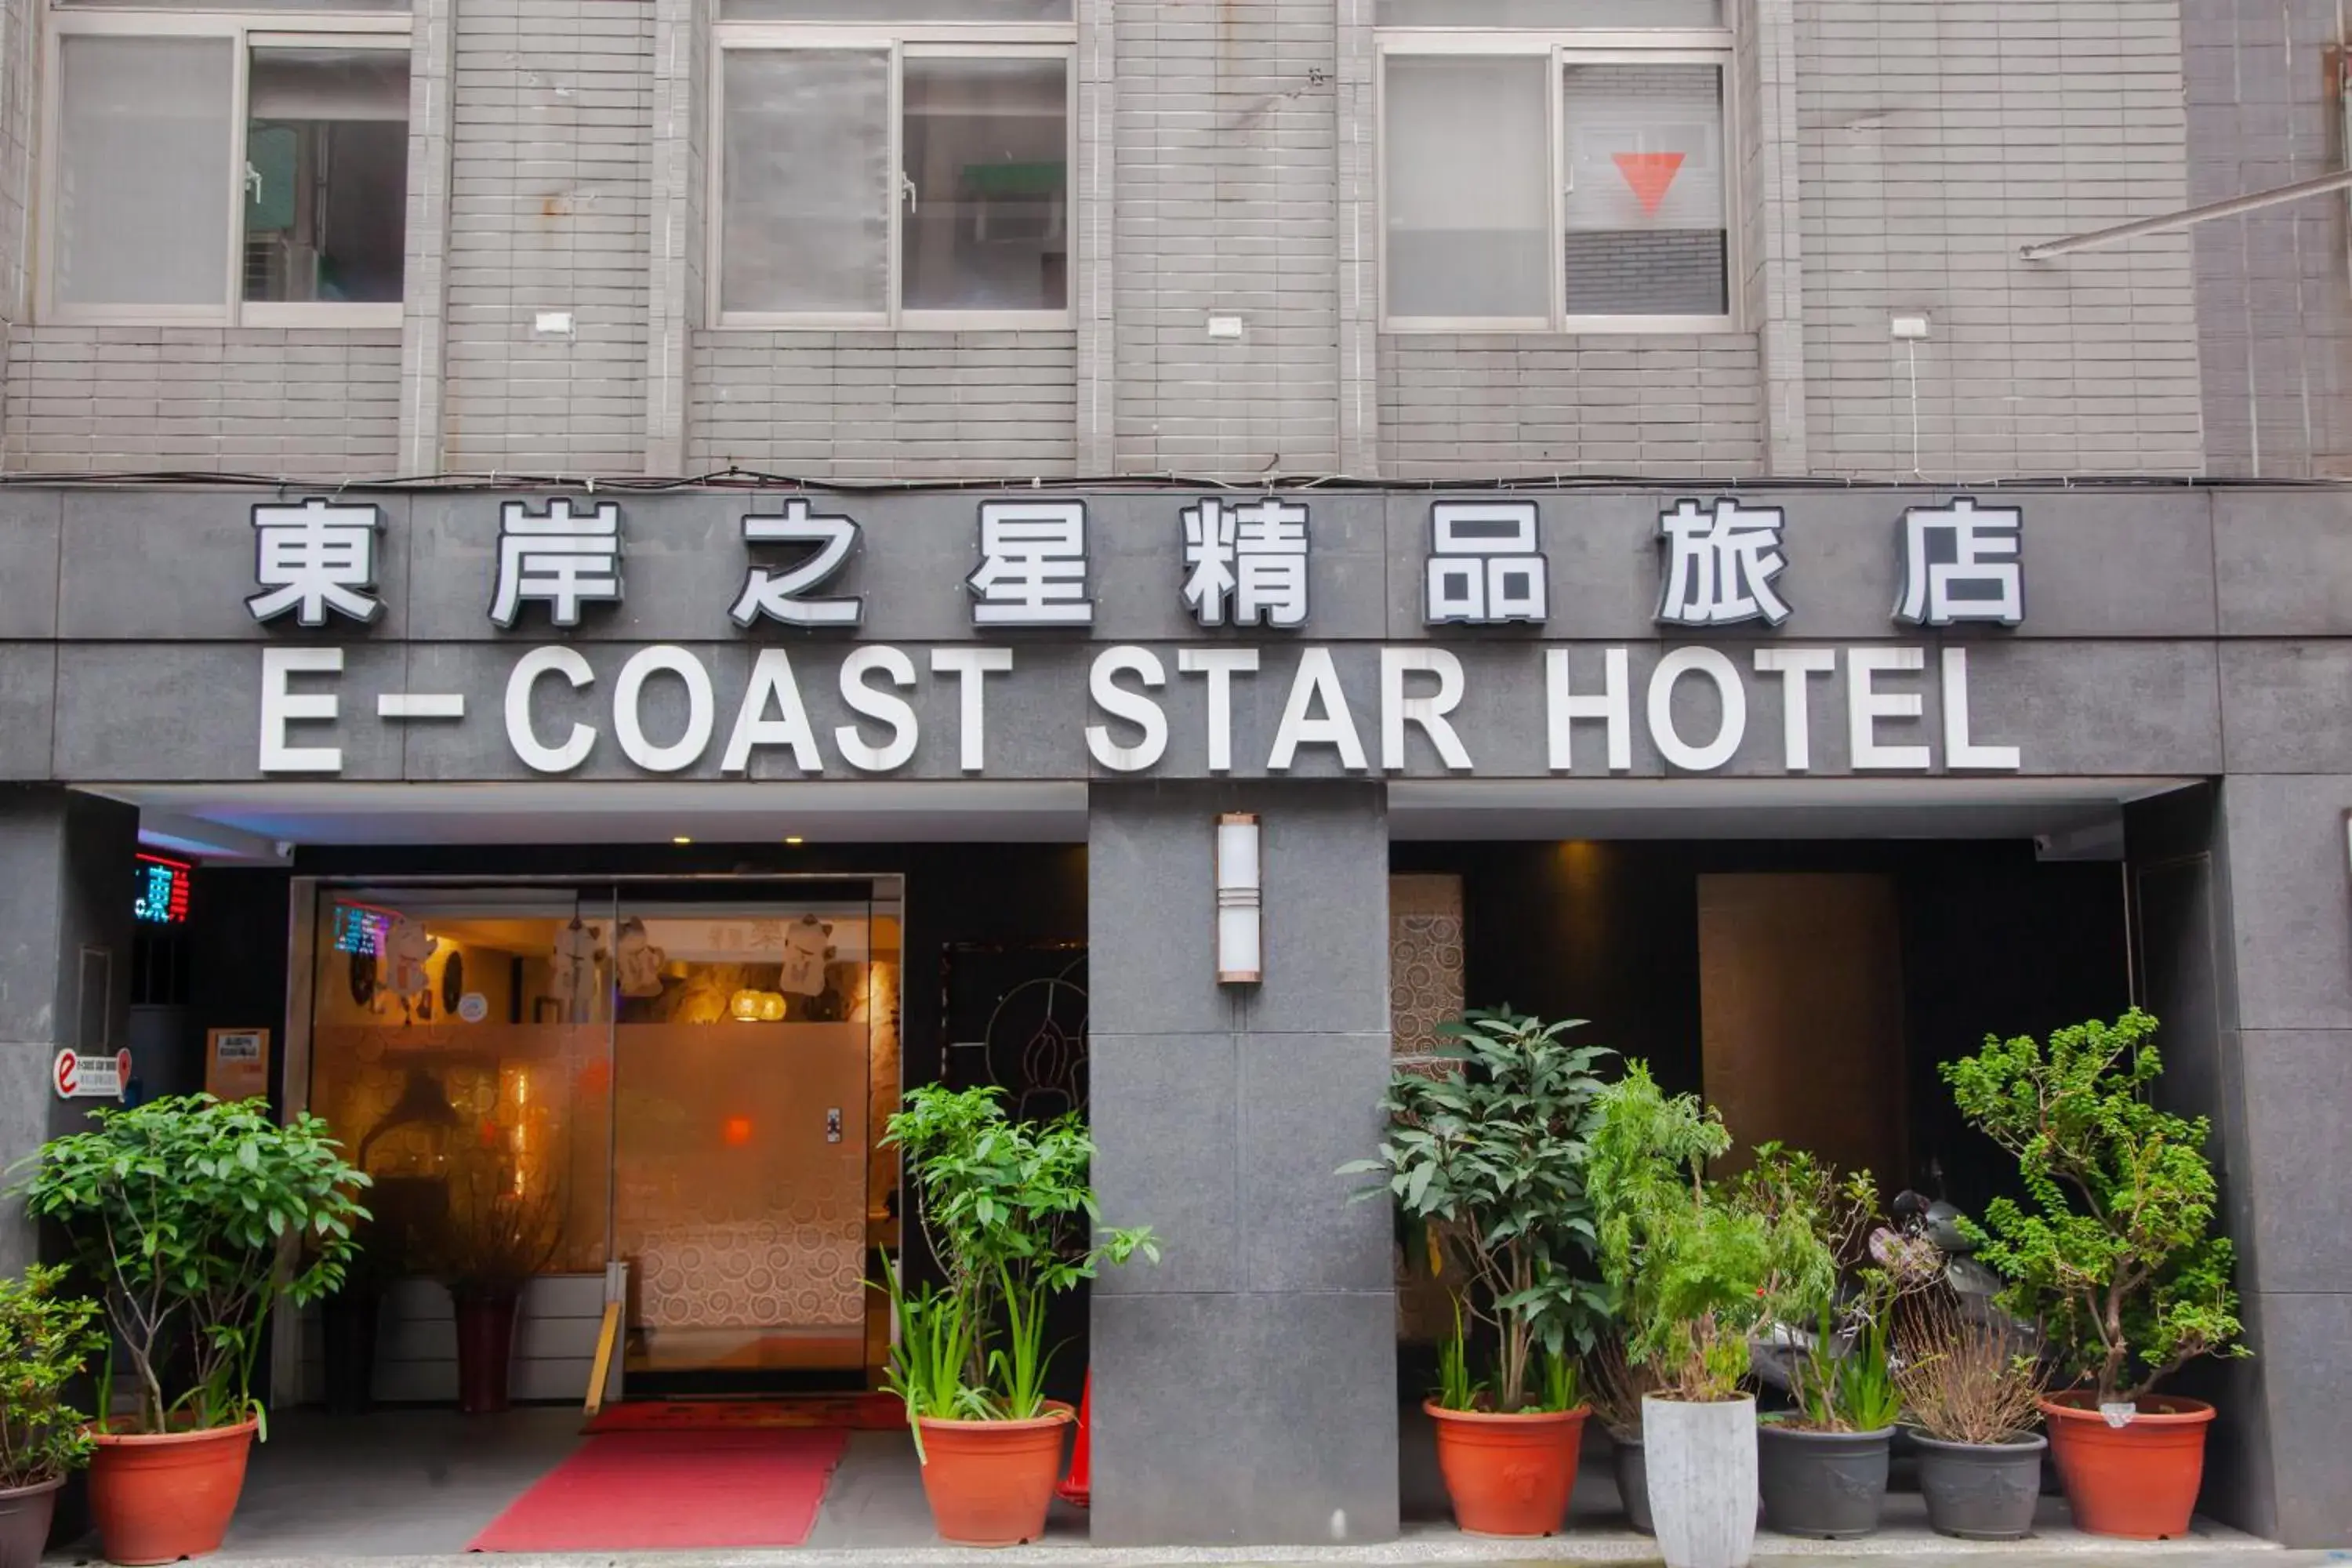 Property logo or sign in E-Coast Star Hotel